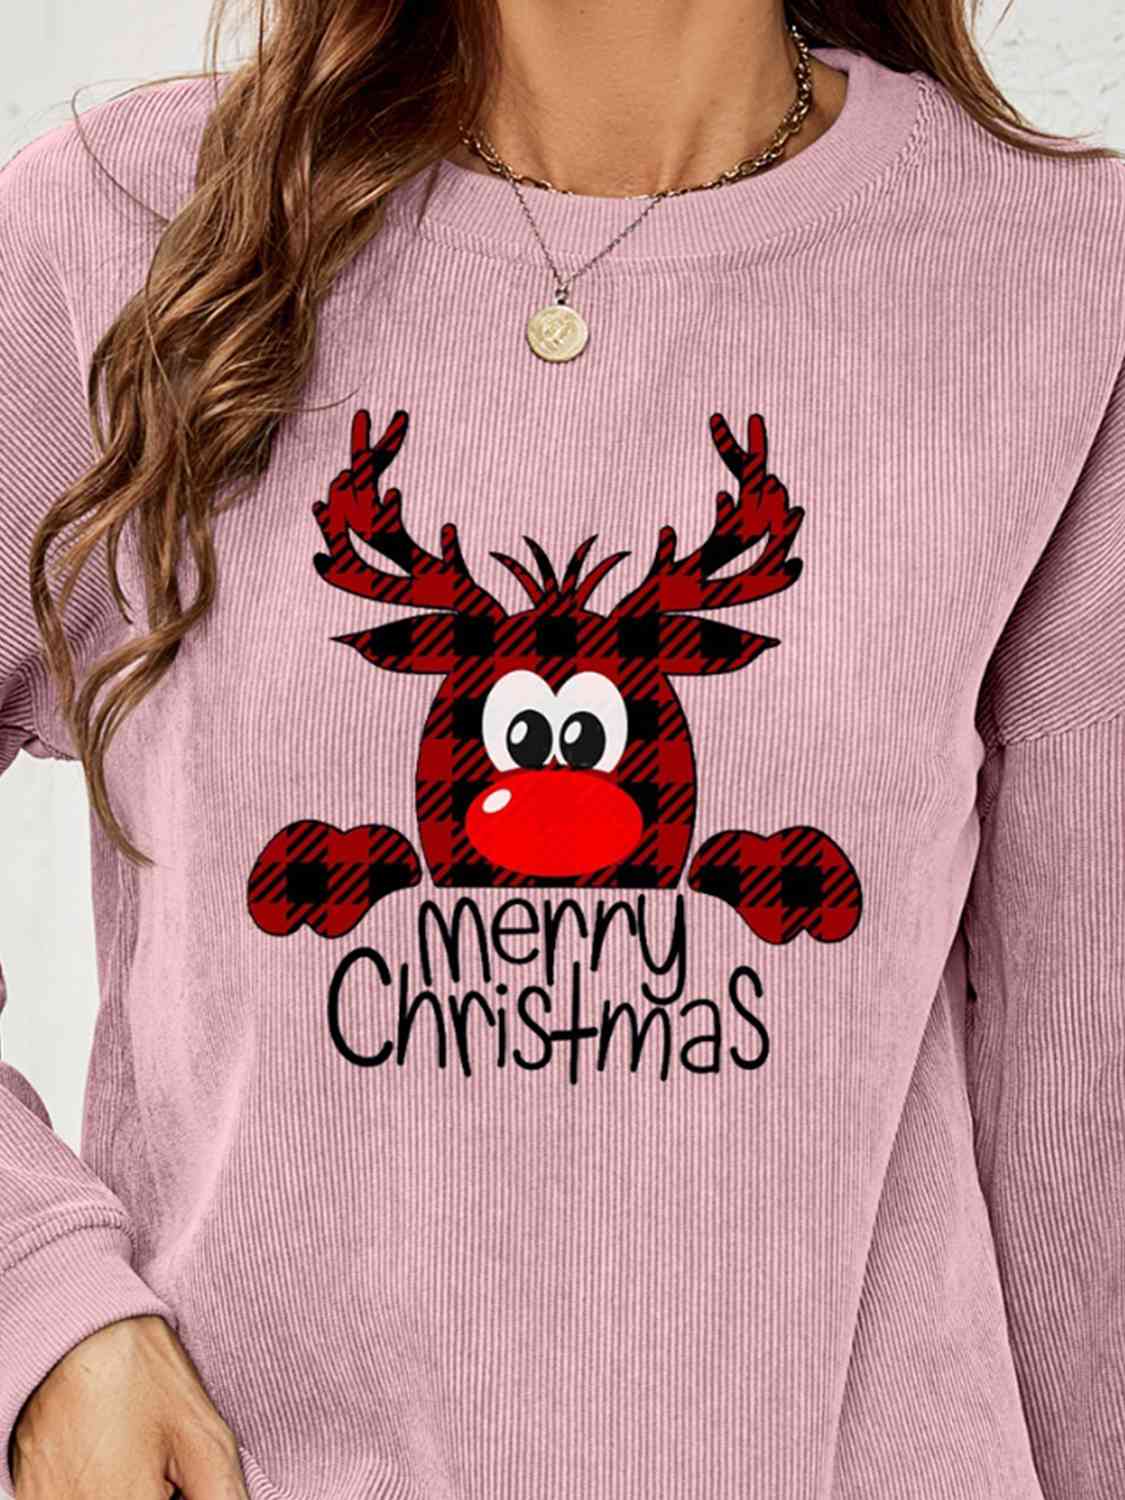 MERRY CHRISTMAS Graphic Sweatshirt free shipping -Oh Em Gee Boutique